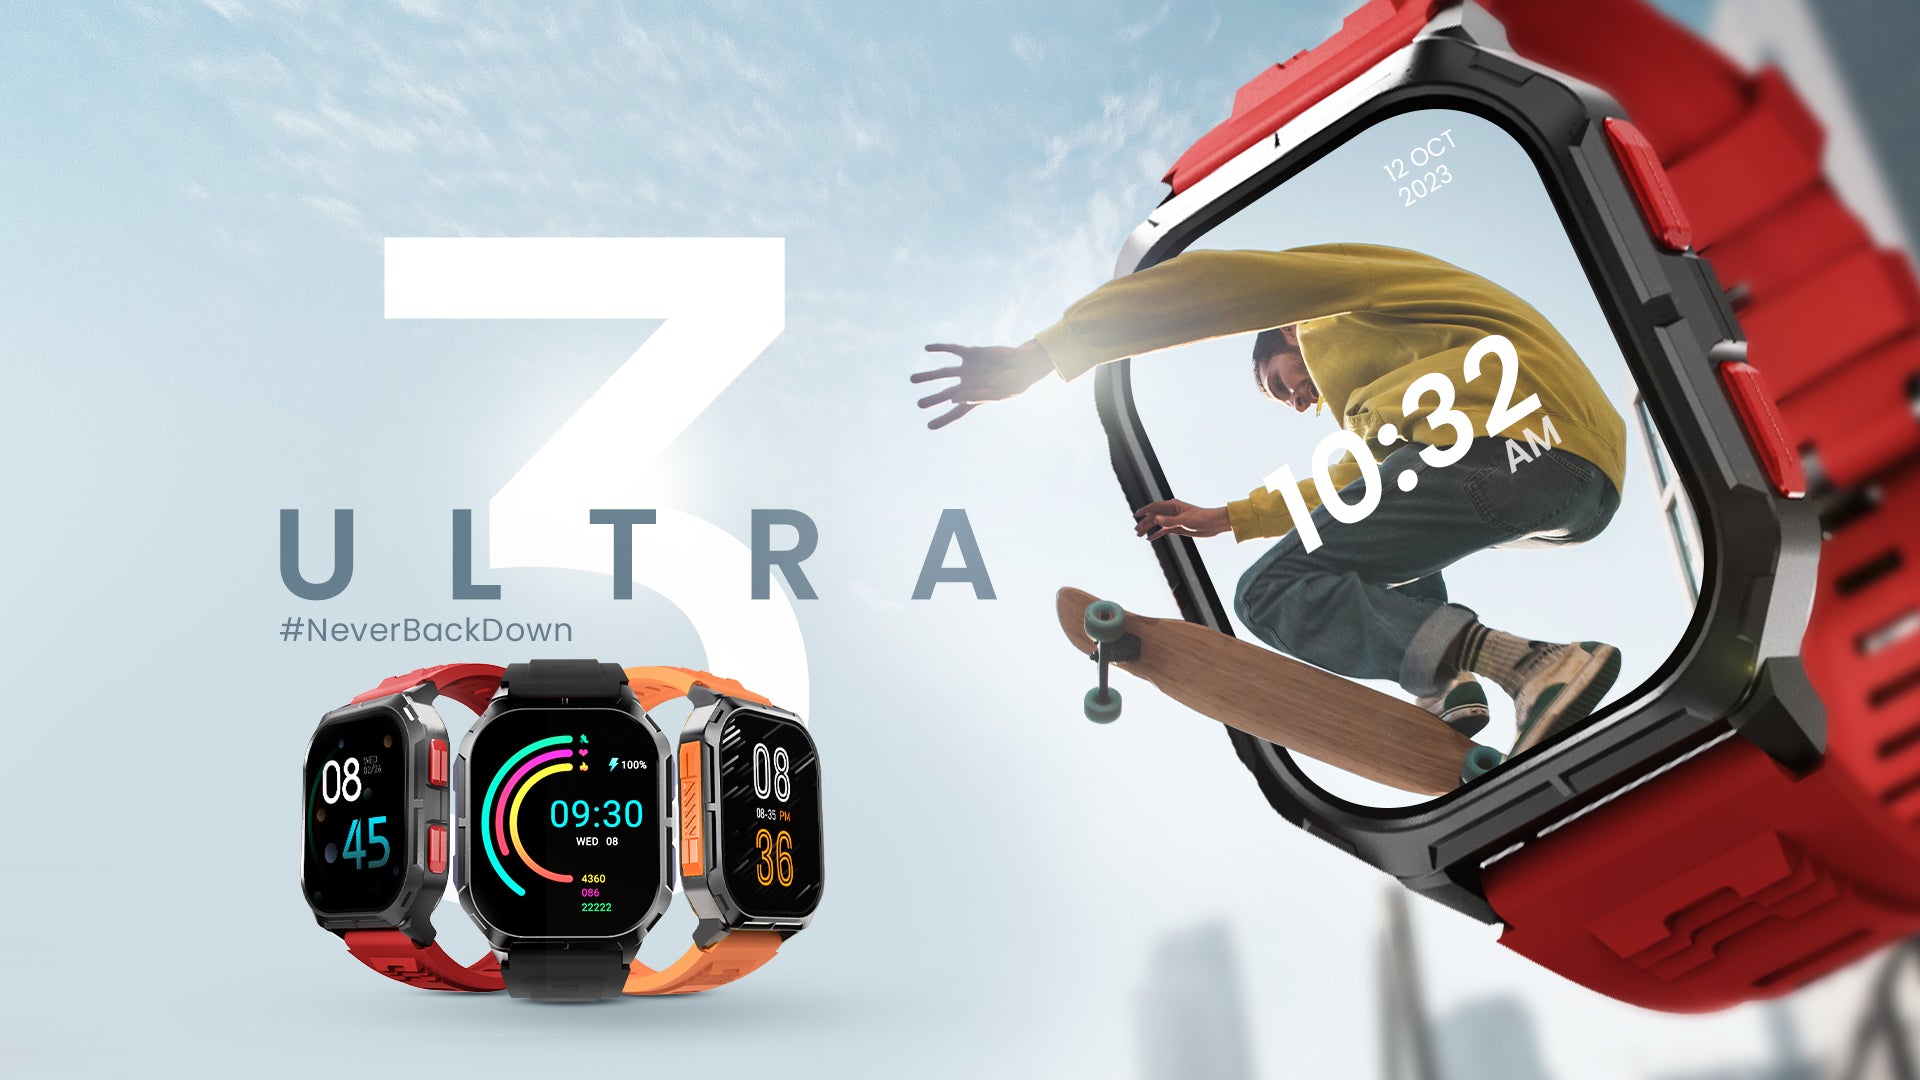 HiFuture Ultra3 Smartwatch with a Spectacular 2.0-inch IPS Display, Wireless Calling, IP68 Waterproof Rating